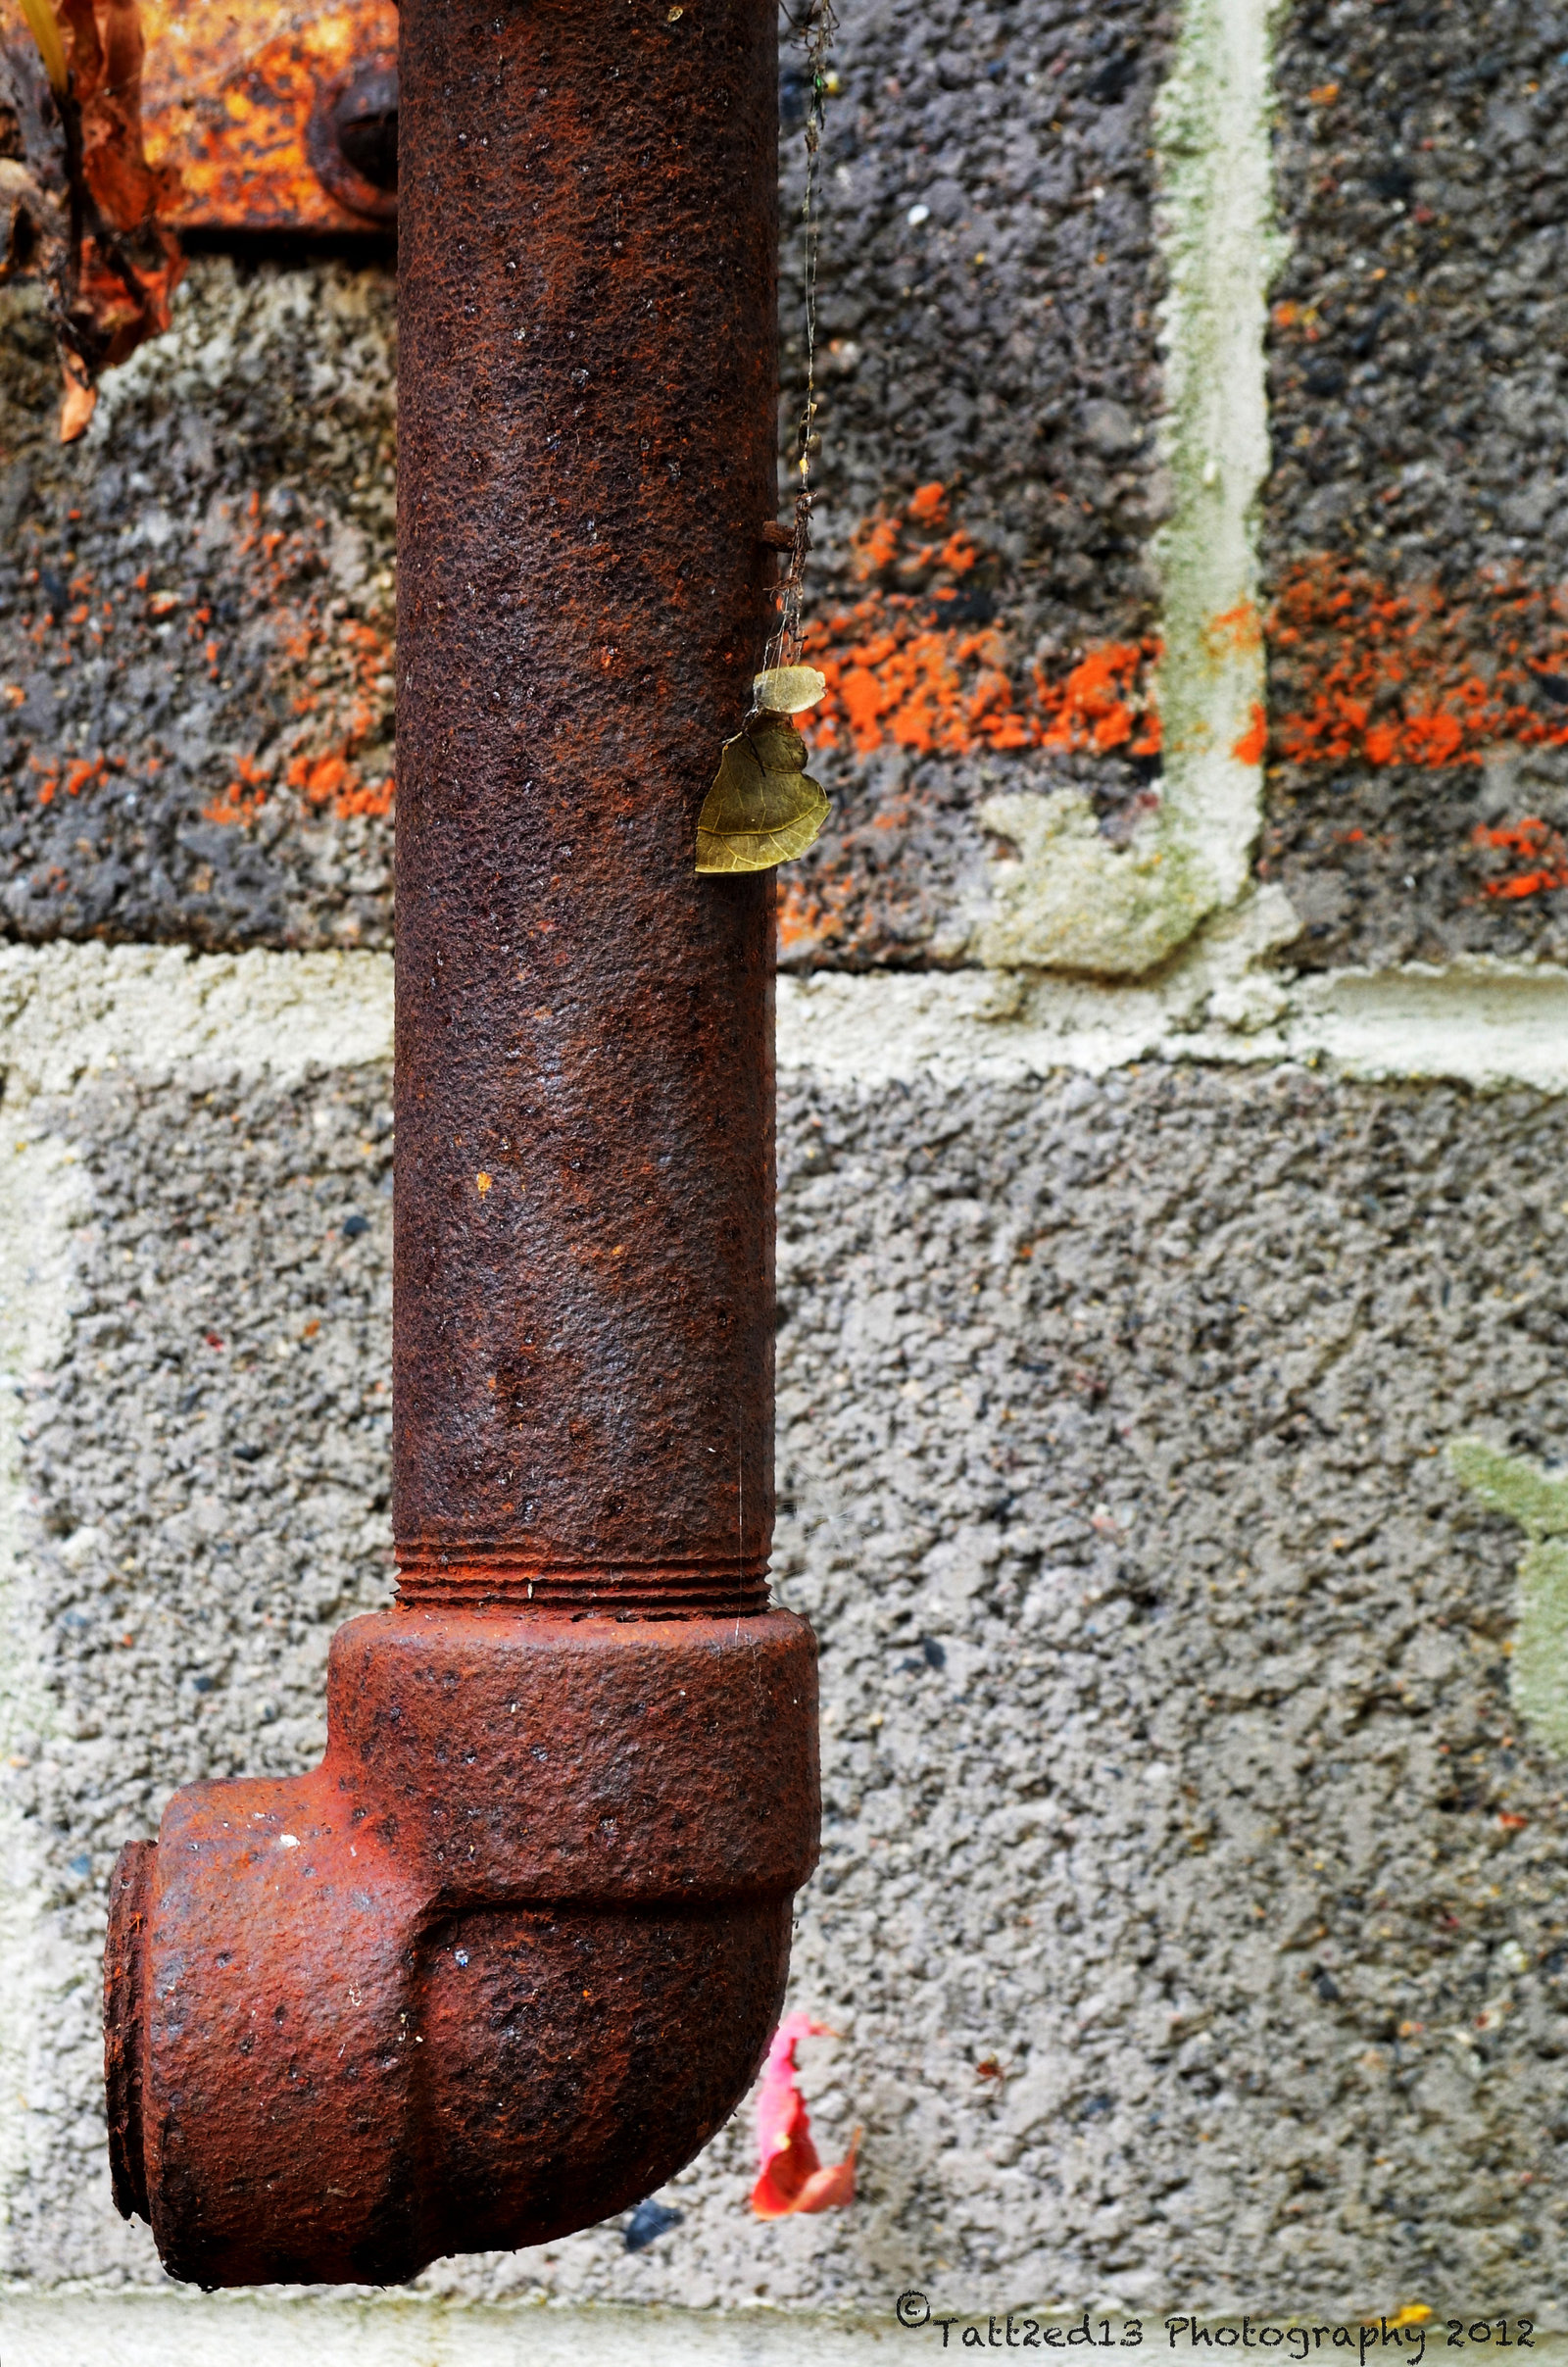 Rusted Pipe Close-up by PAlisauskas on DeviantArt